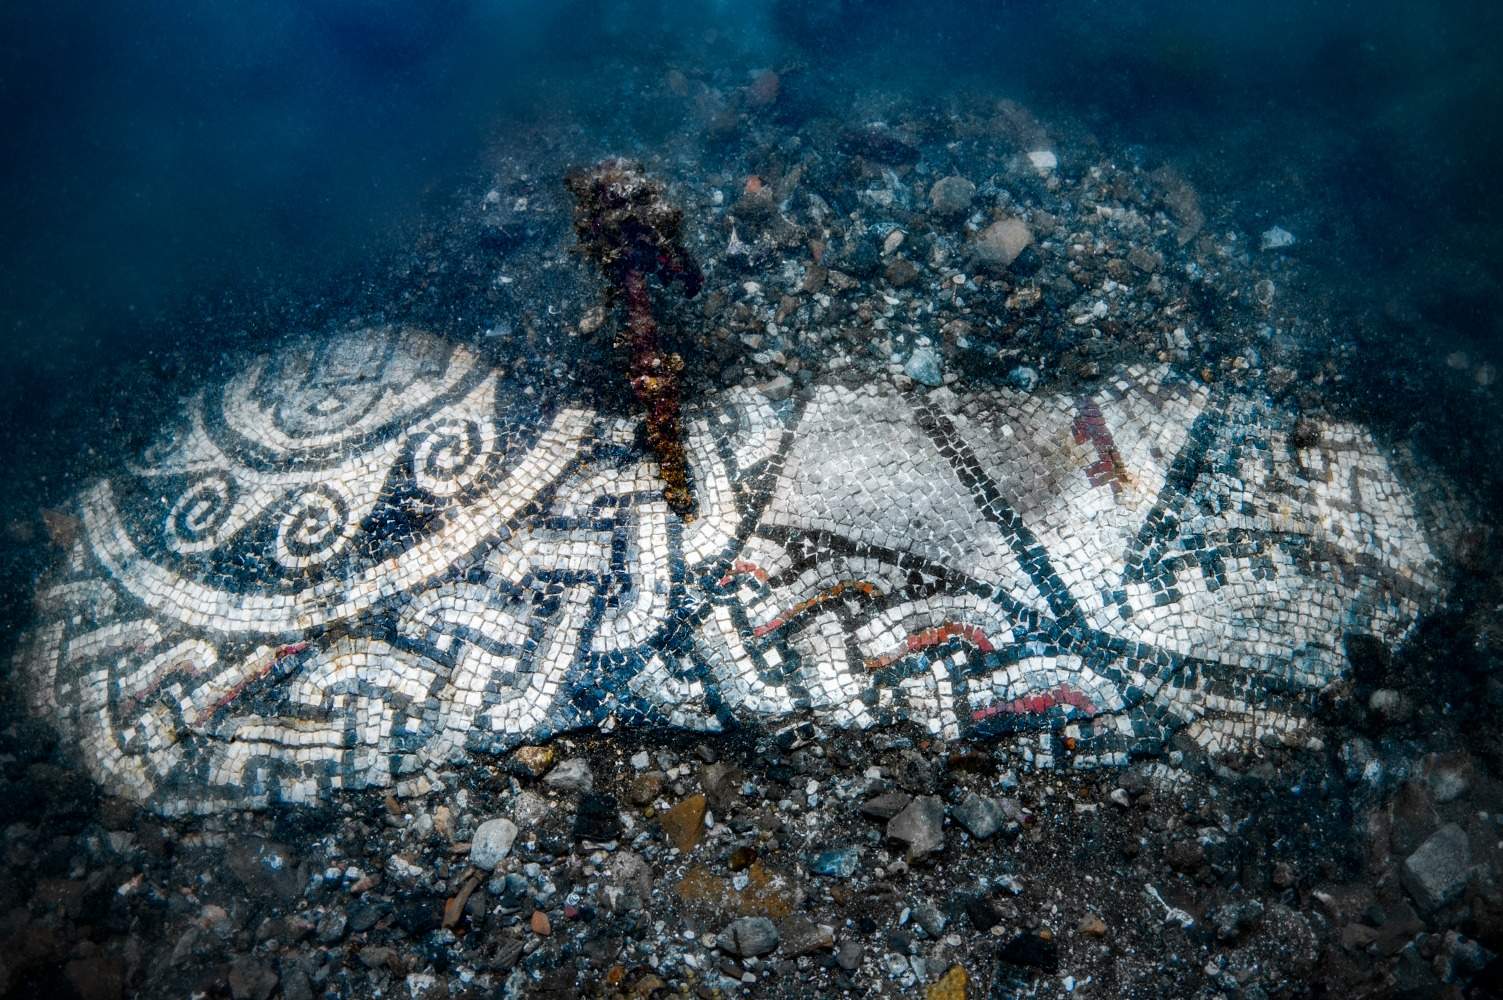 New underwater mosaic discovered in Baia, featuring intertwining blue lines